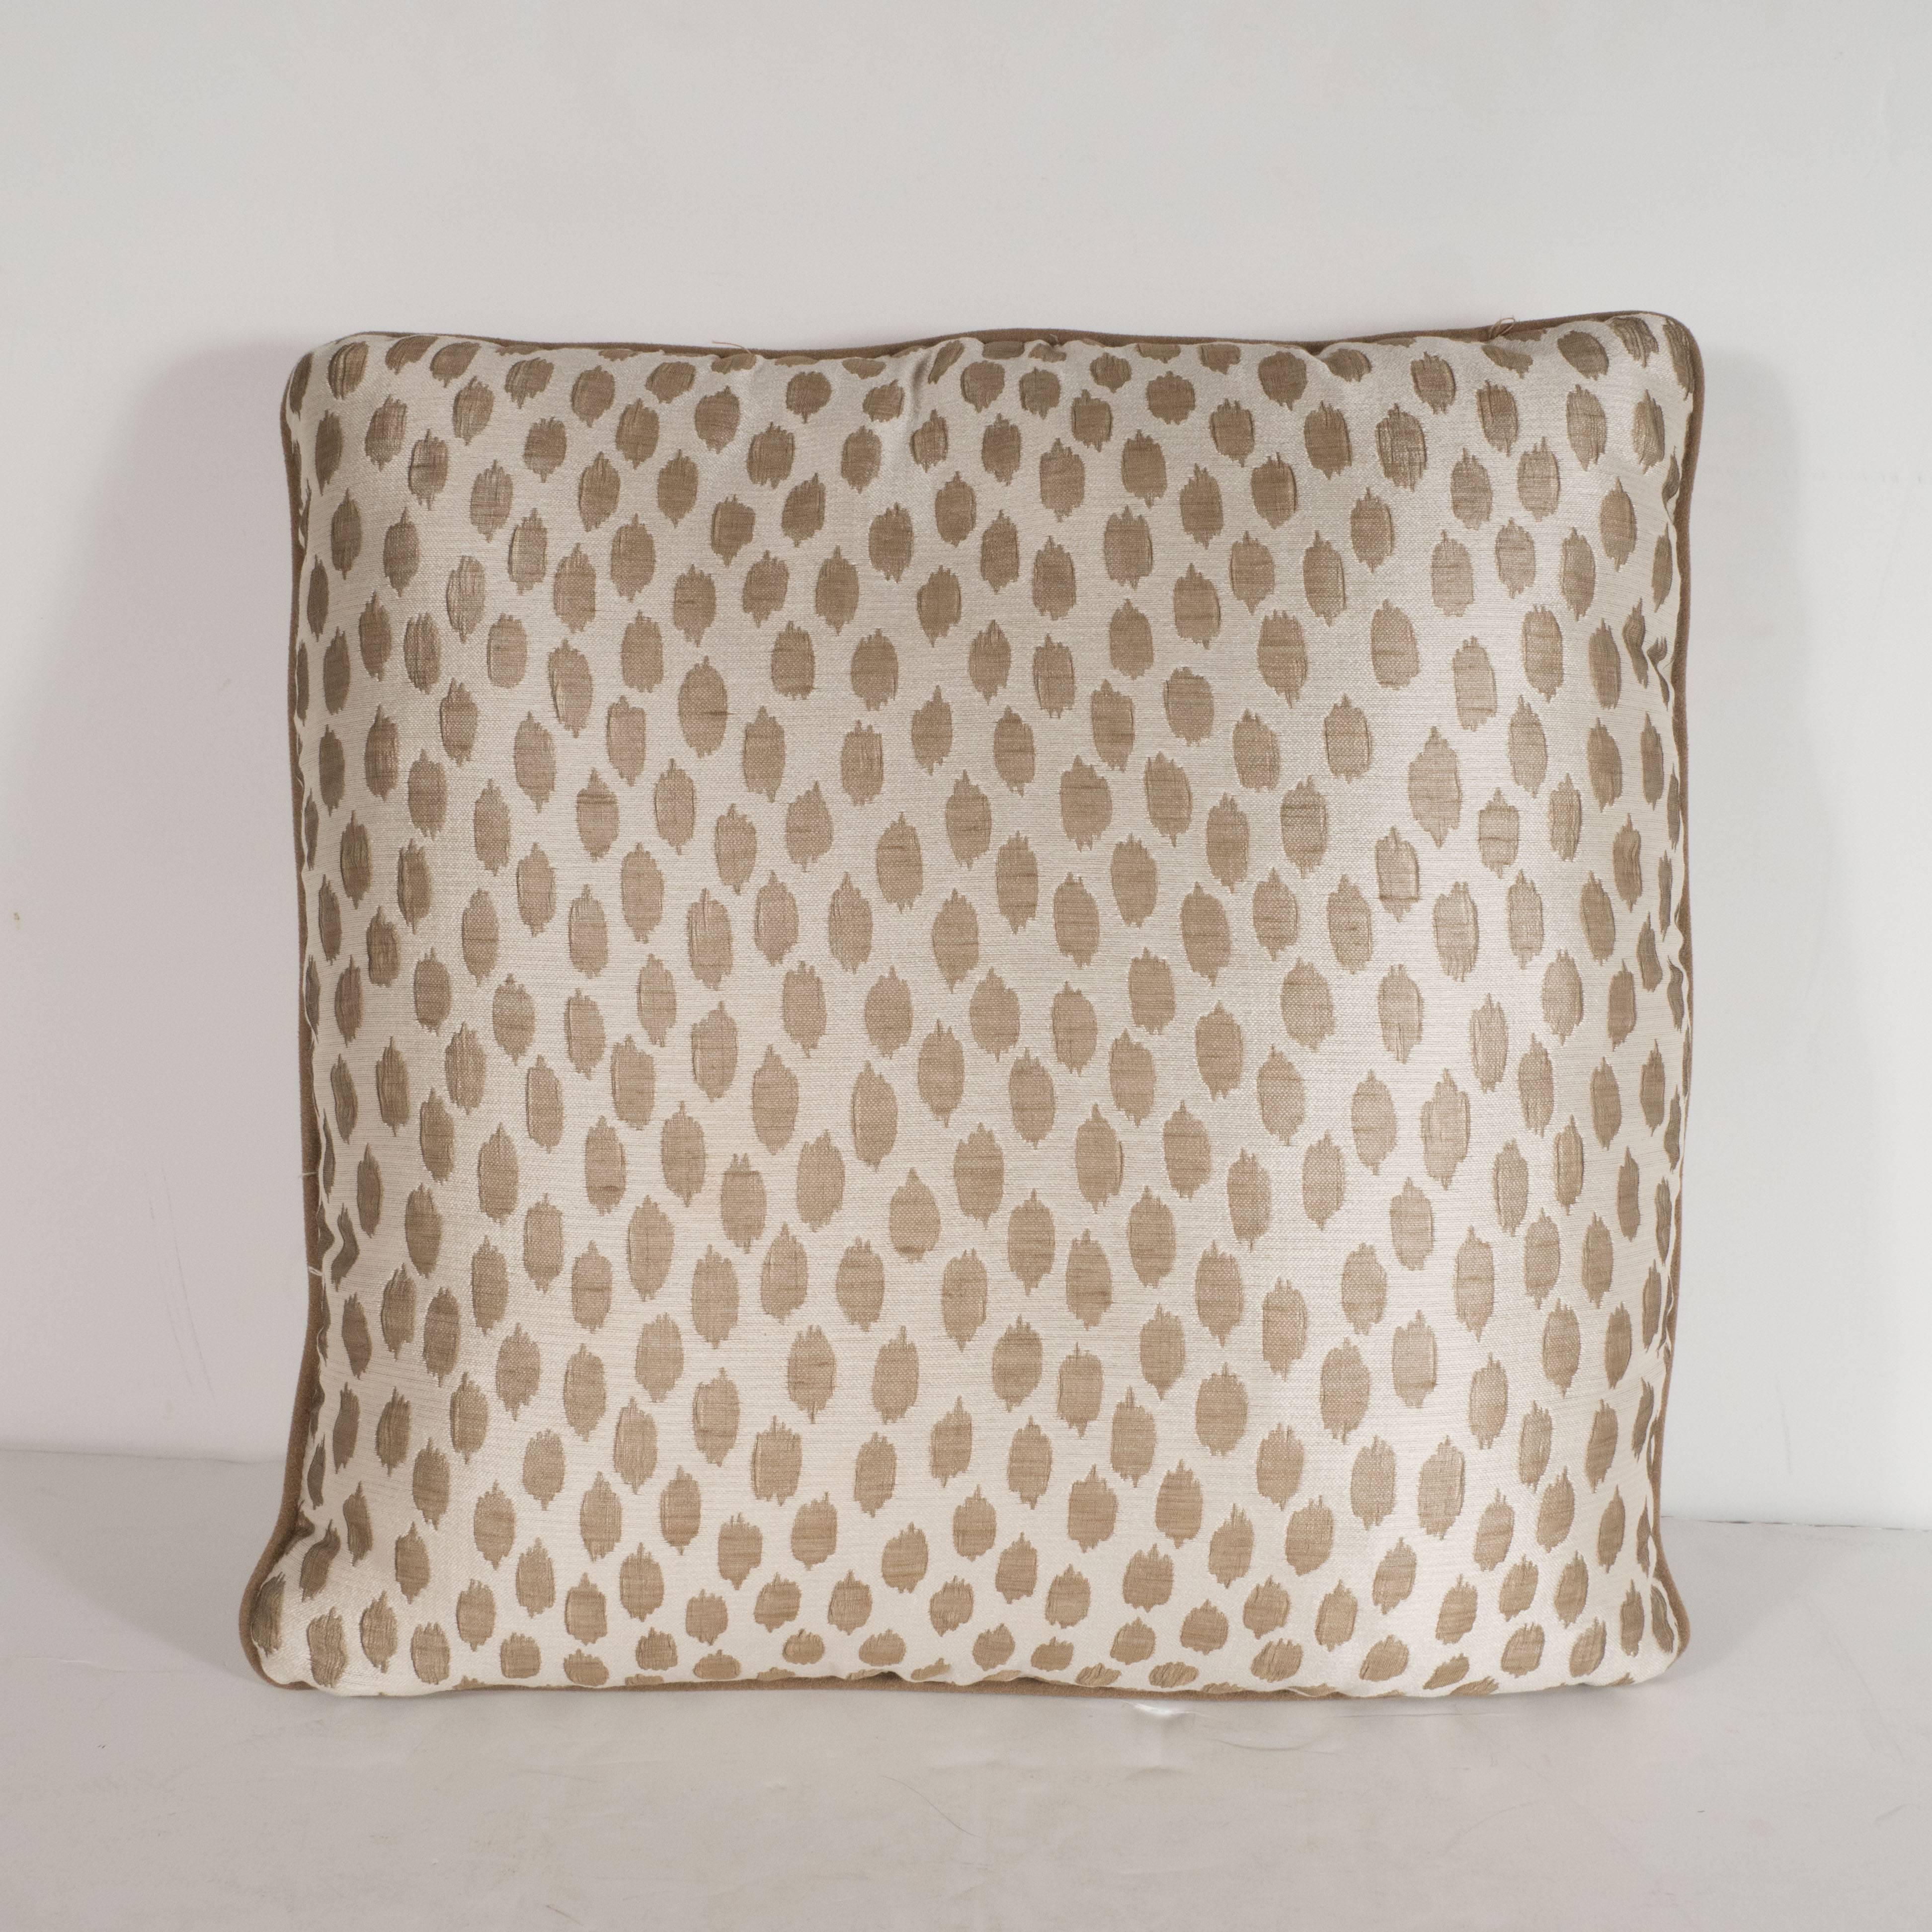 This elegant pair of square modernist pillows features organic forms in muted gold hue- with piping in a matching tone- that float against an ecru background with a horizontal weave. With its austere form and sophisticated fabric, this pillow would